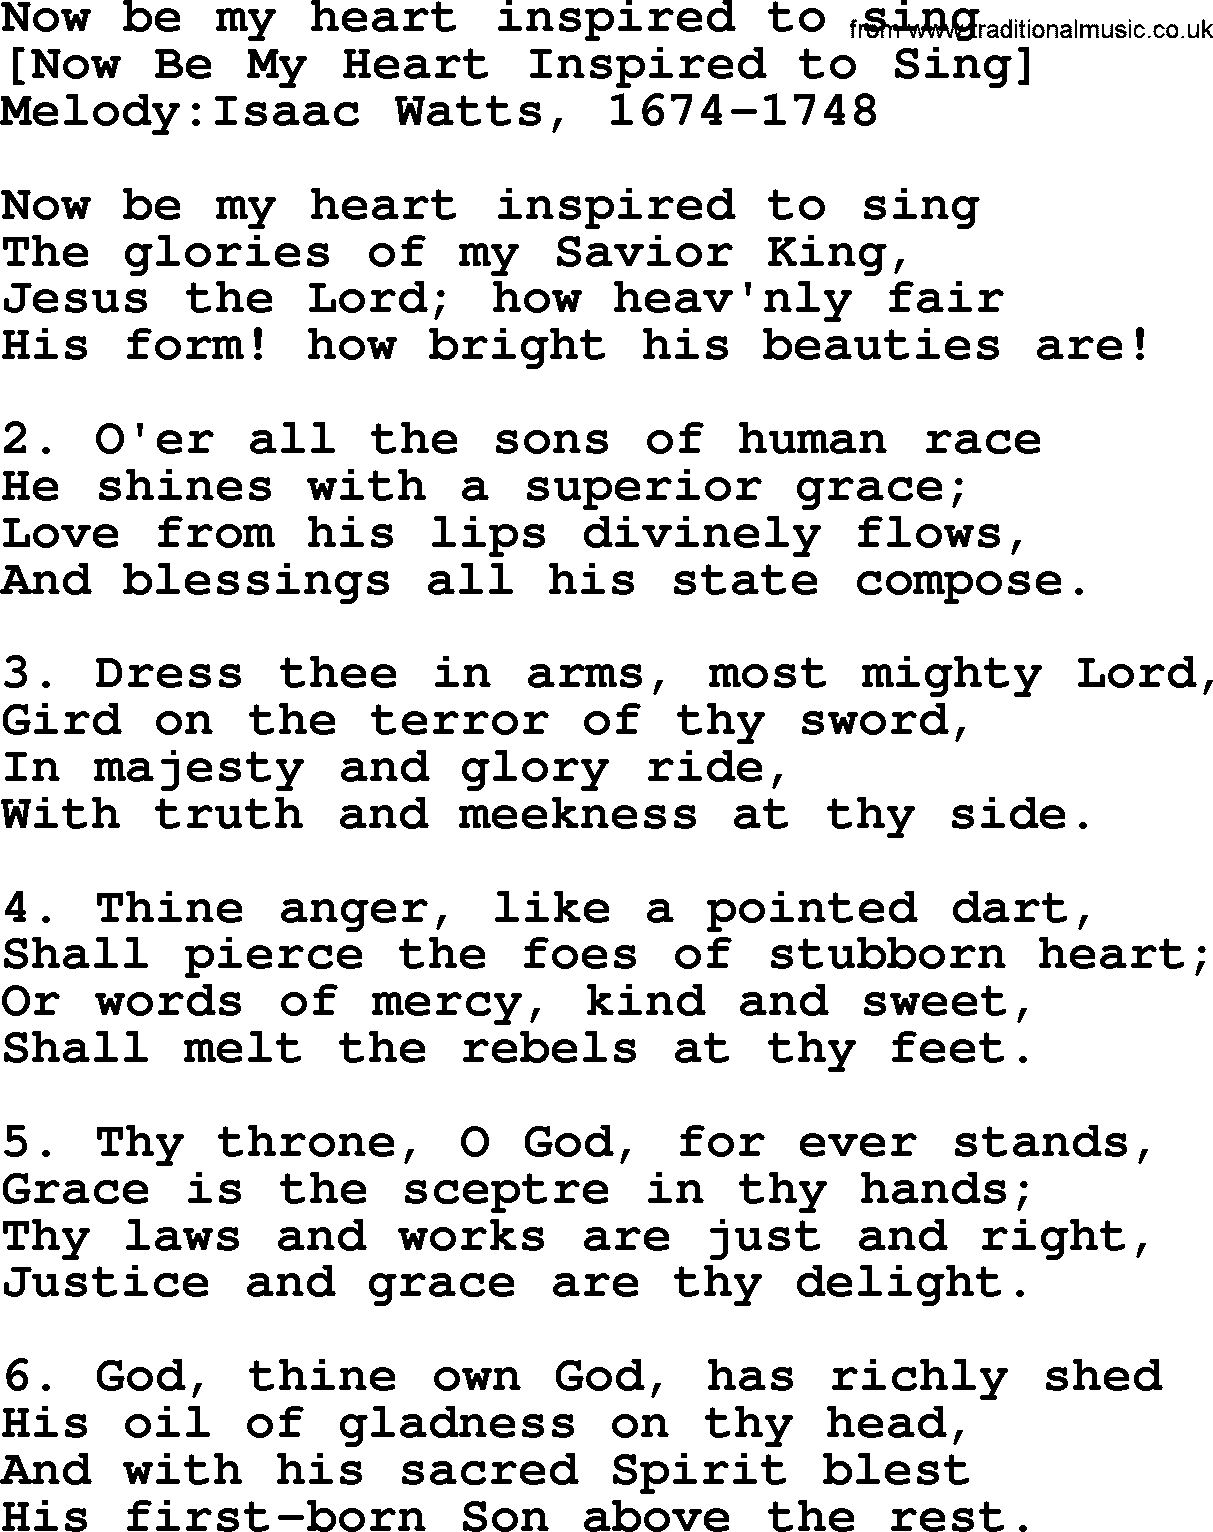 Old English Song: Now Be My Heart Inspired To Sing lyrics